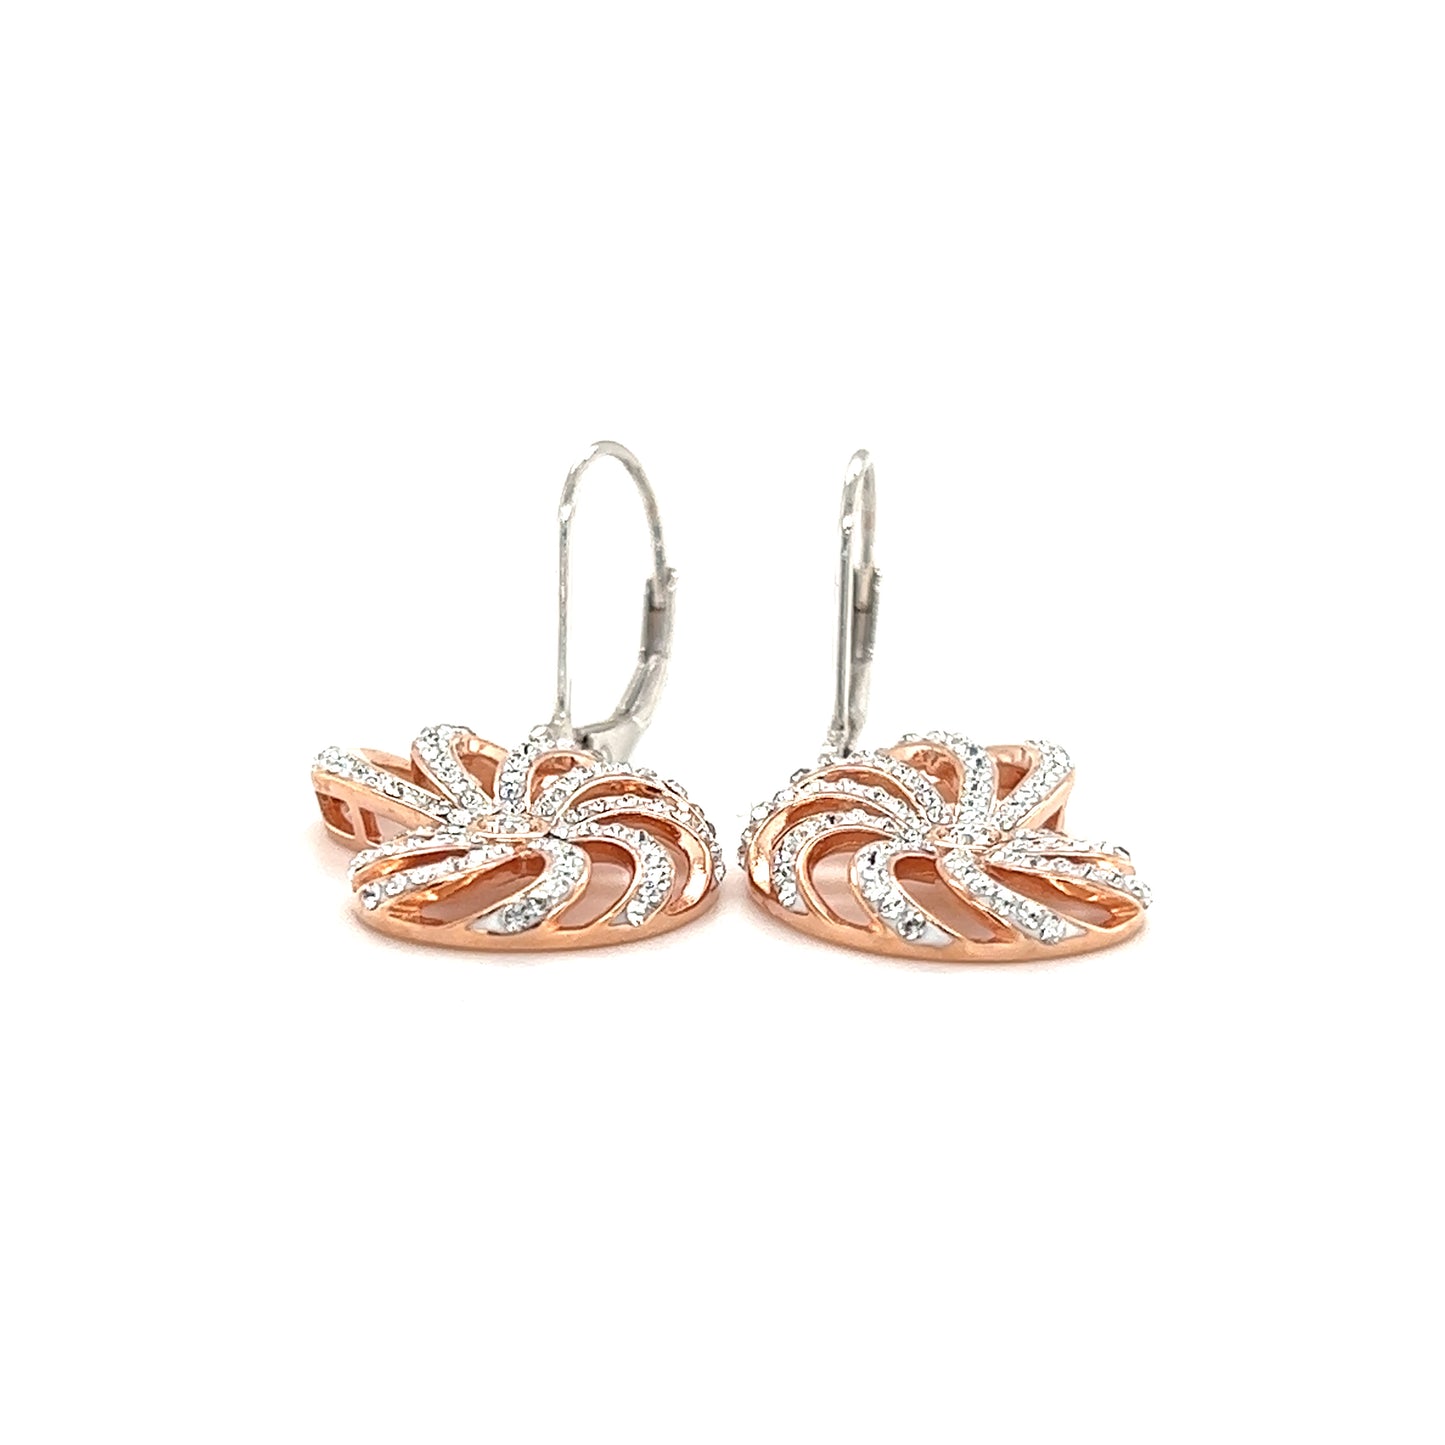 Nautilus Shell Dangle Earrings with Rose Gold Plate and White Crystals in Sterling Silver Flat Front View